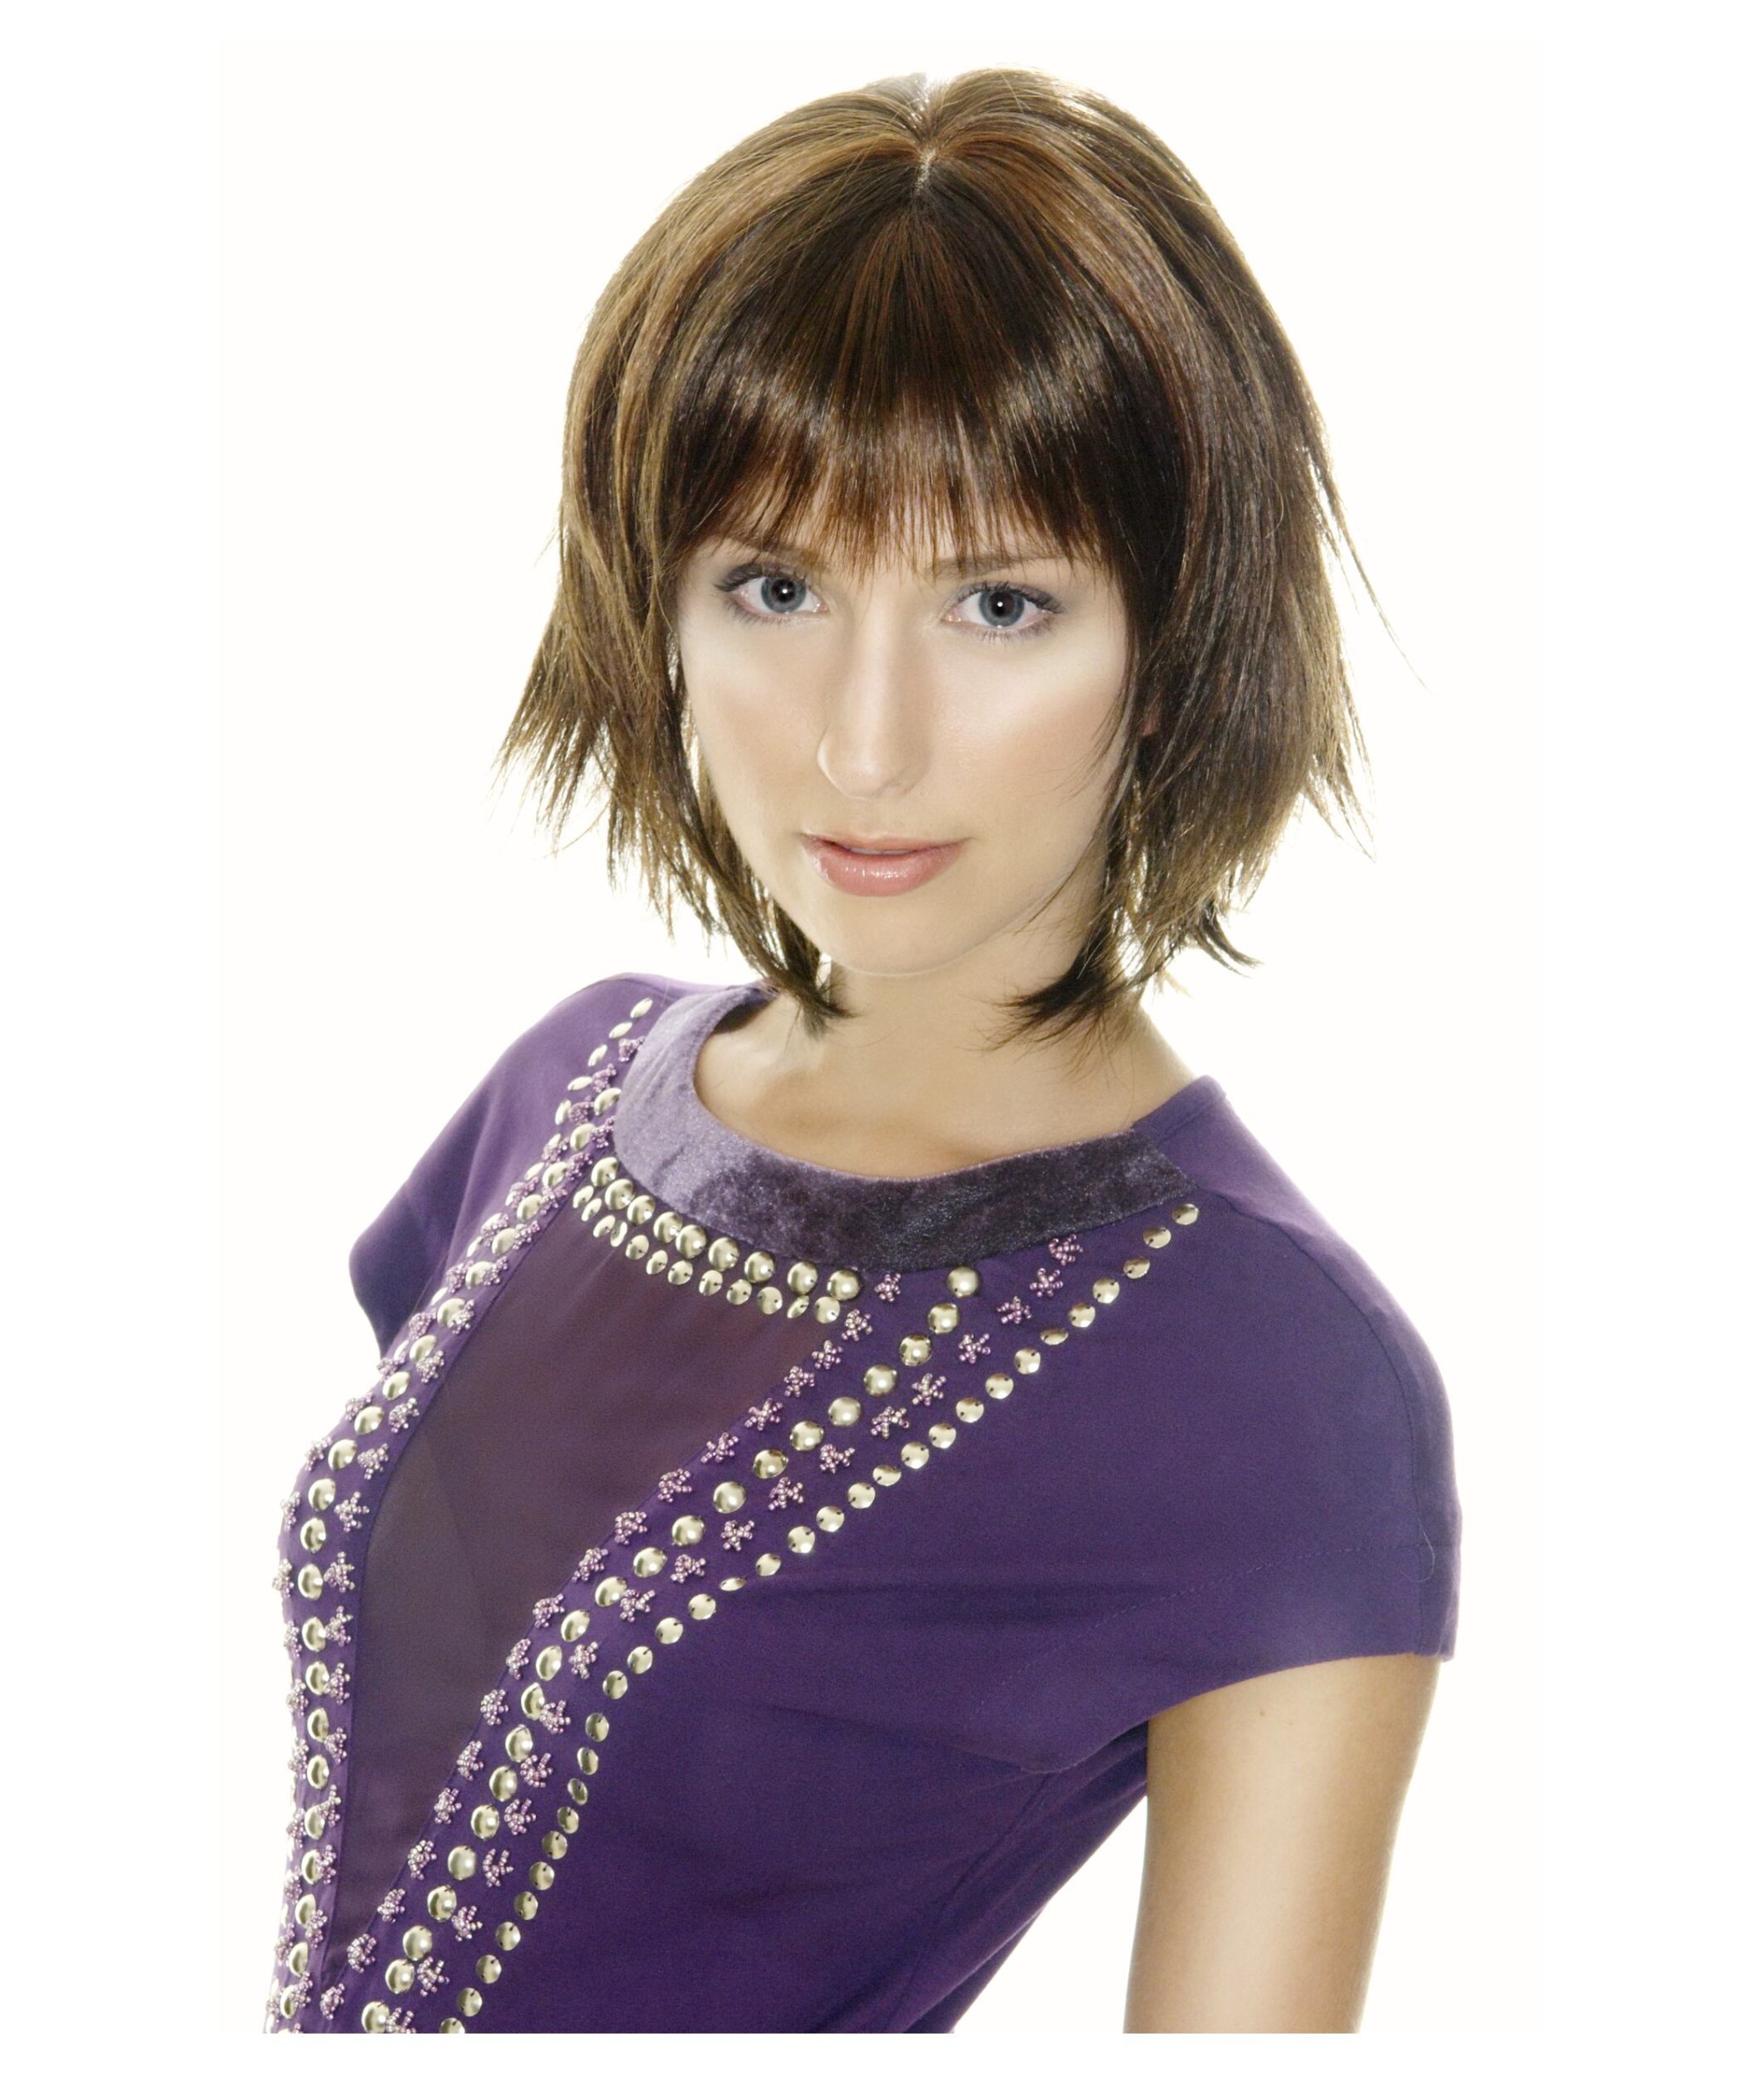 Bex Mid-Length Synthetic Hair Wig | Cancer Research UK Online Shop